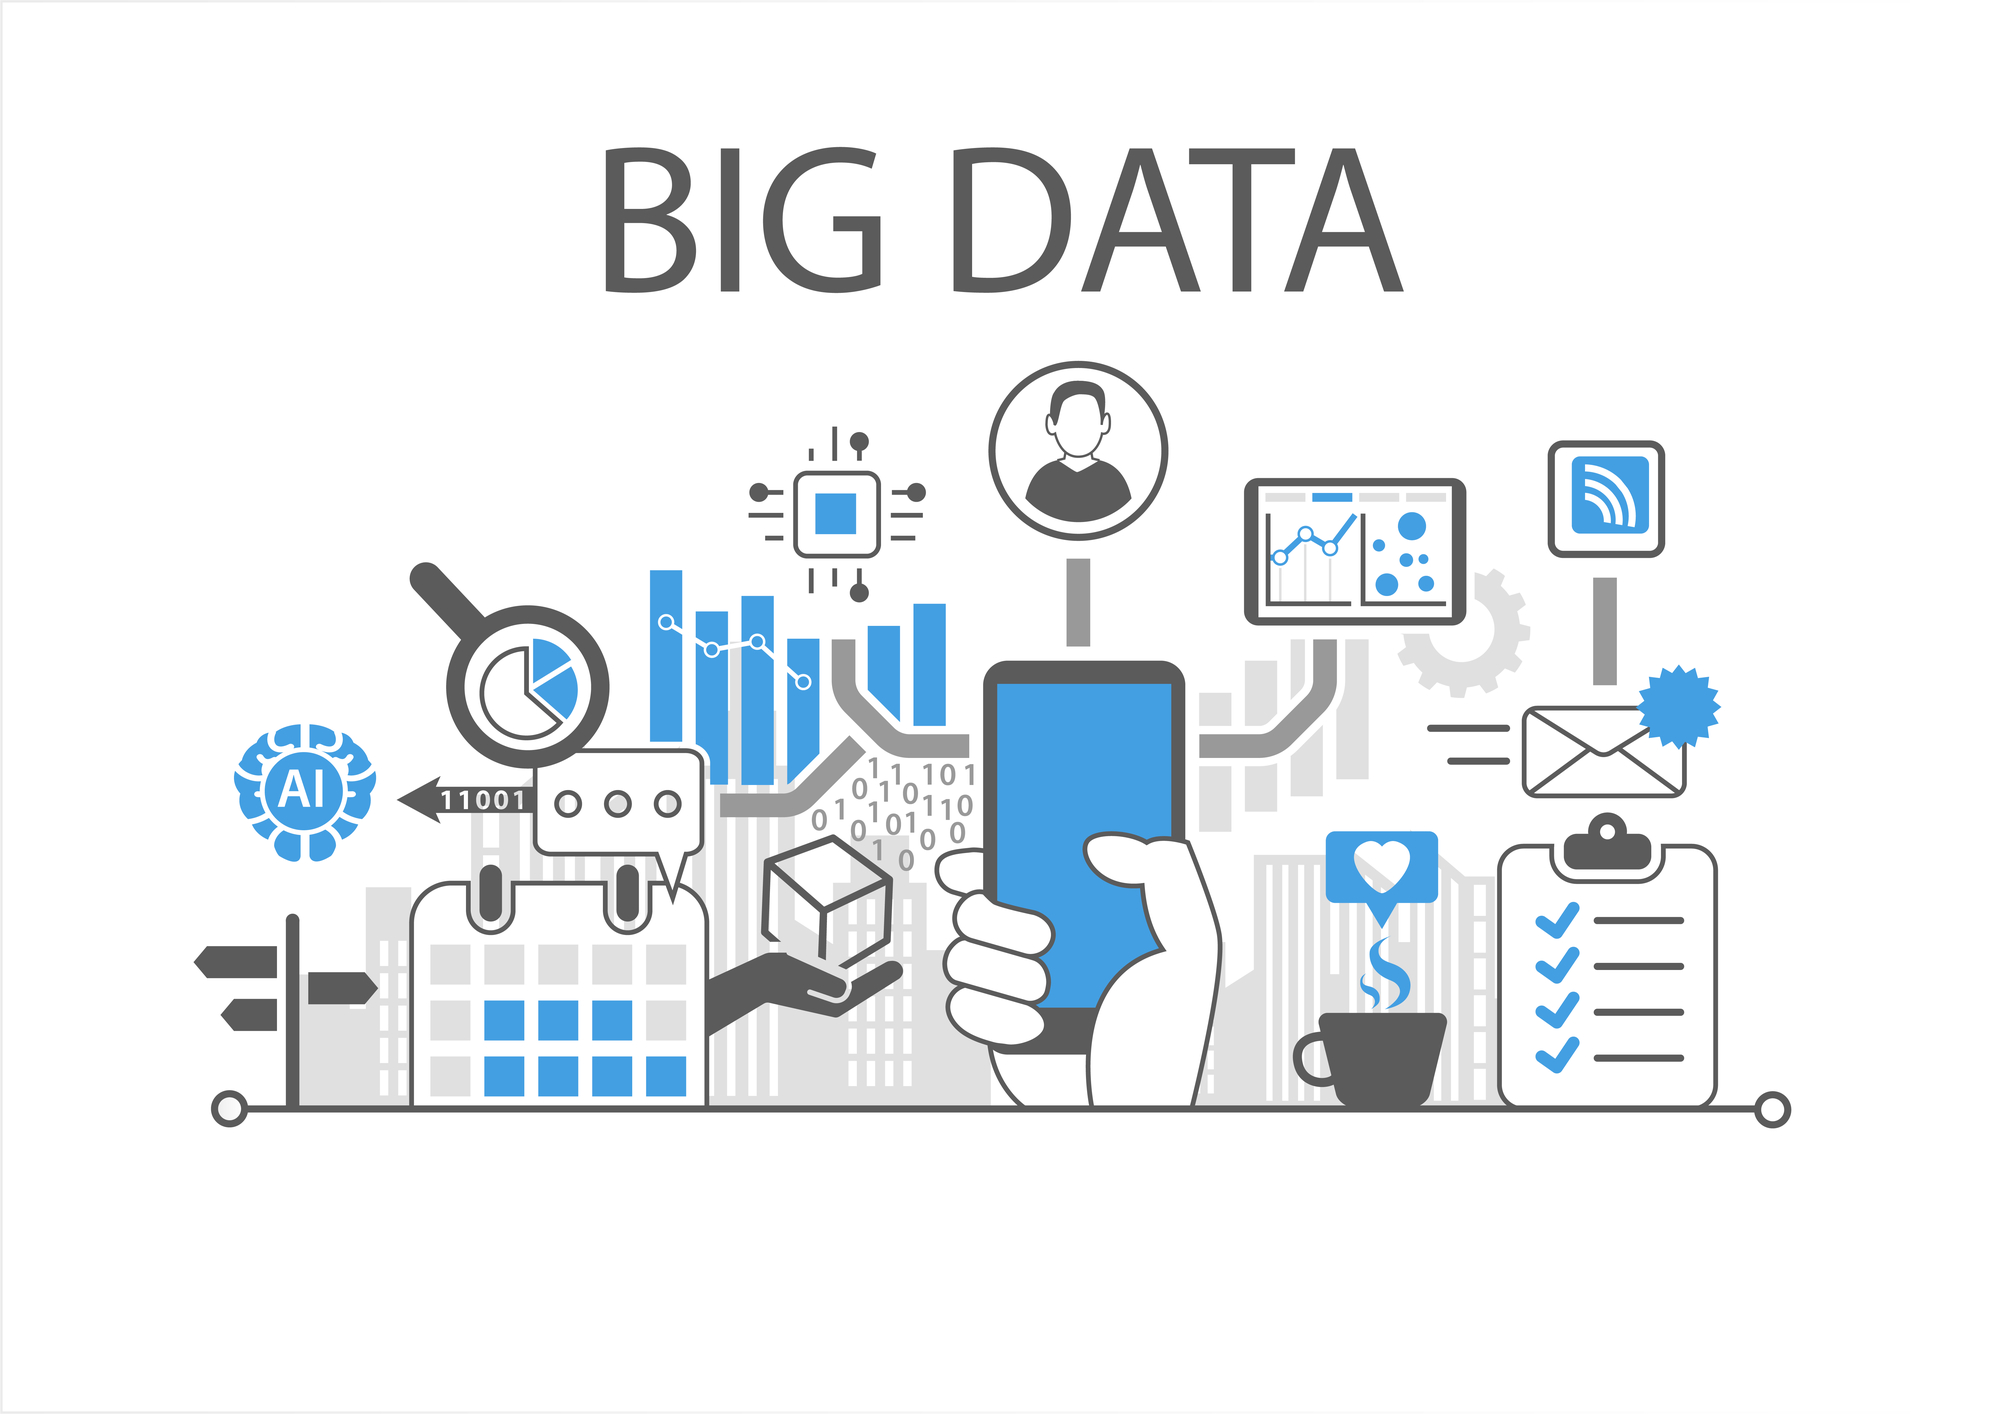 Top Big Data Tools to be used in 2020